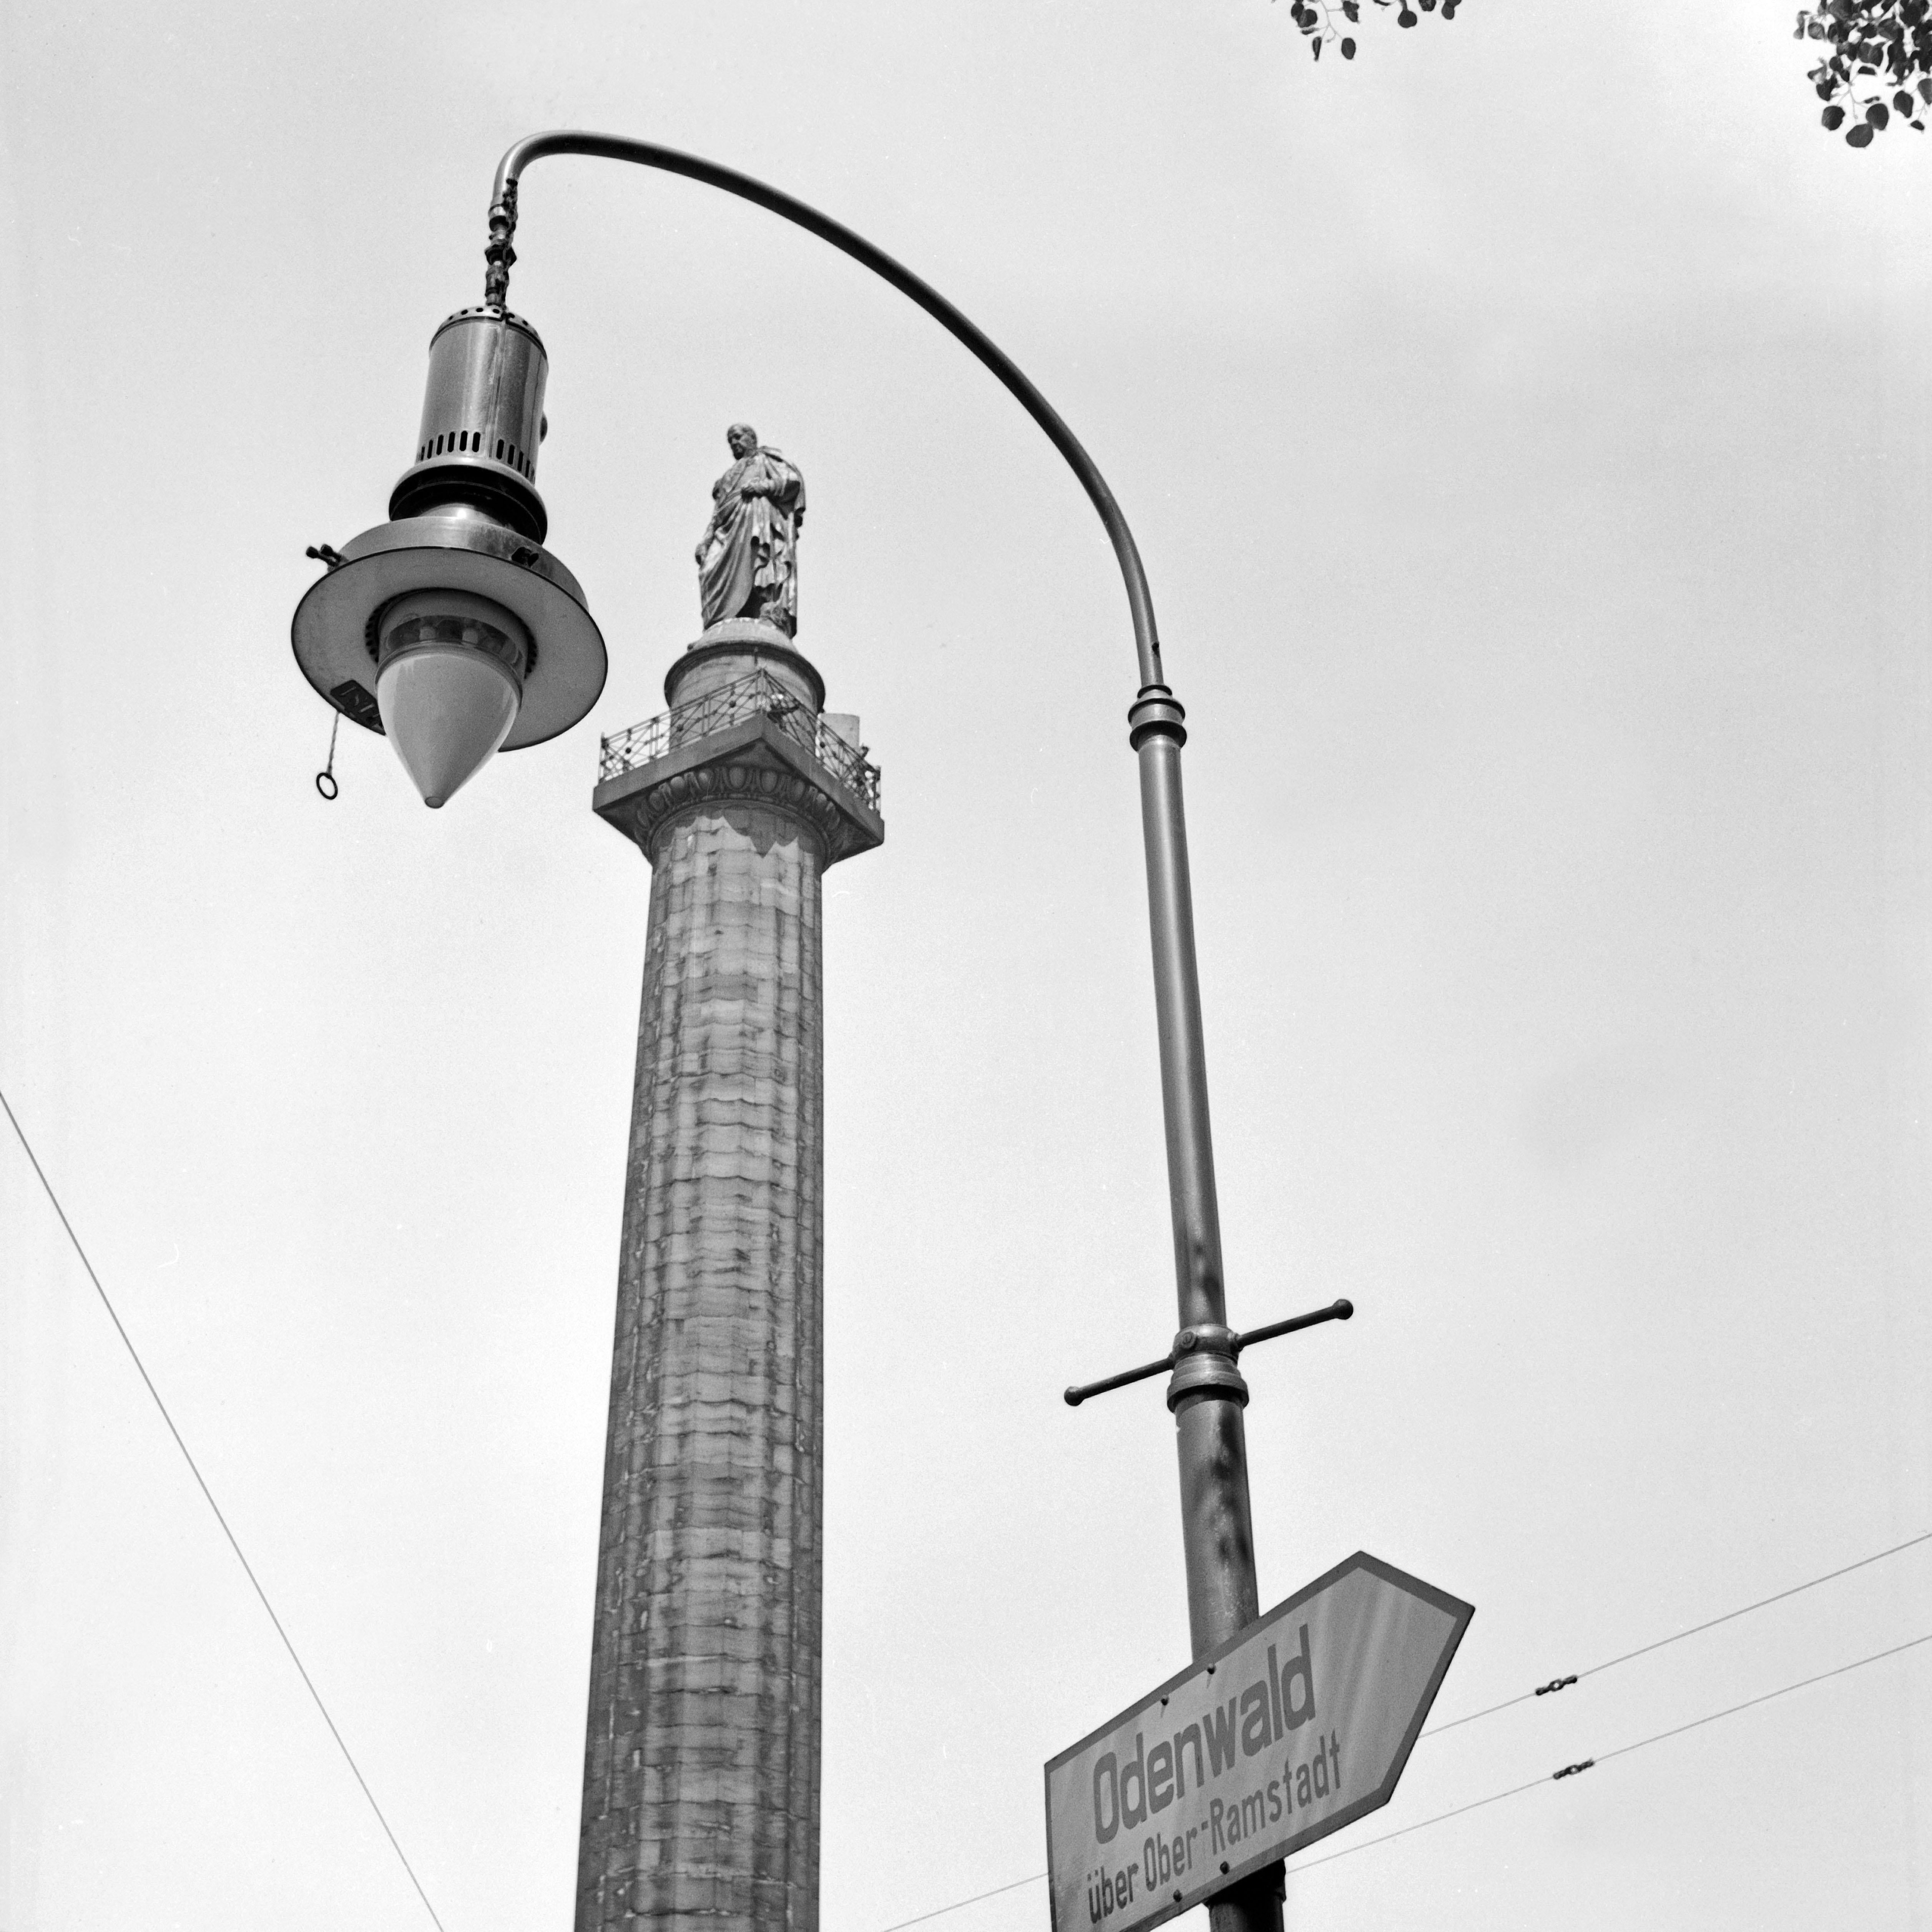 Karl Heinrich Lämmel Black and White Photograph - Ludwig's column at Luisenplatz square at Darmstadt, Germany 1938 Printed Later 